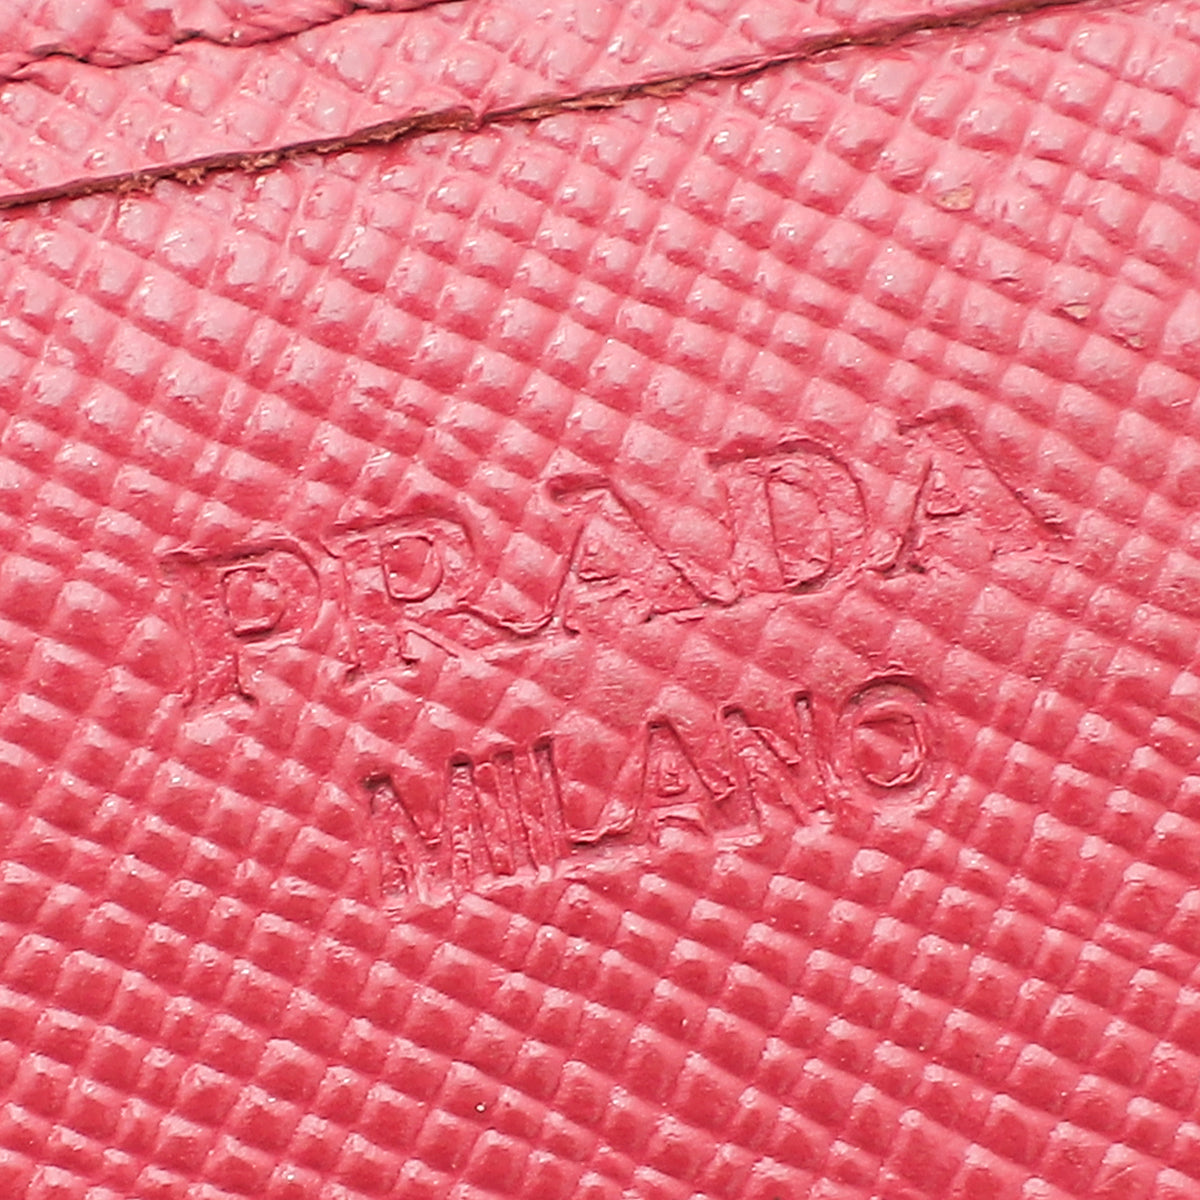 Prada Pink Lux Bow Continental Wallet